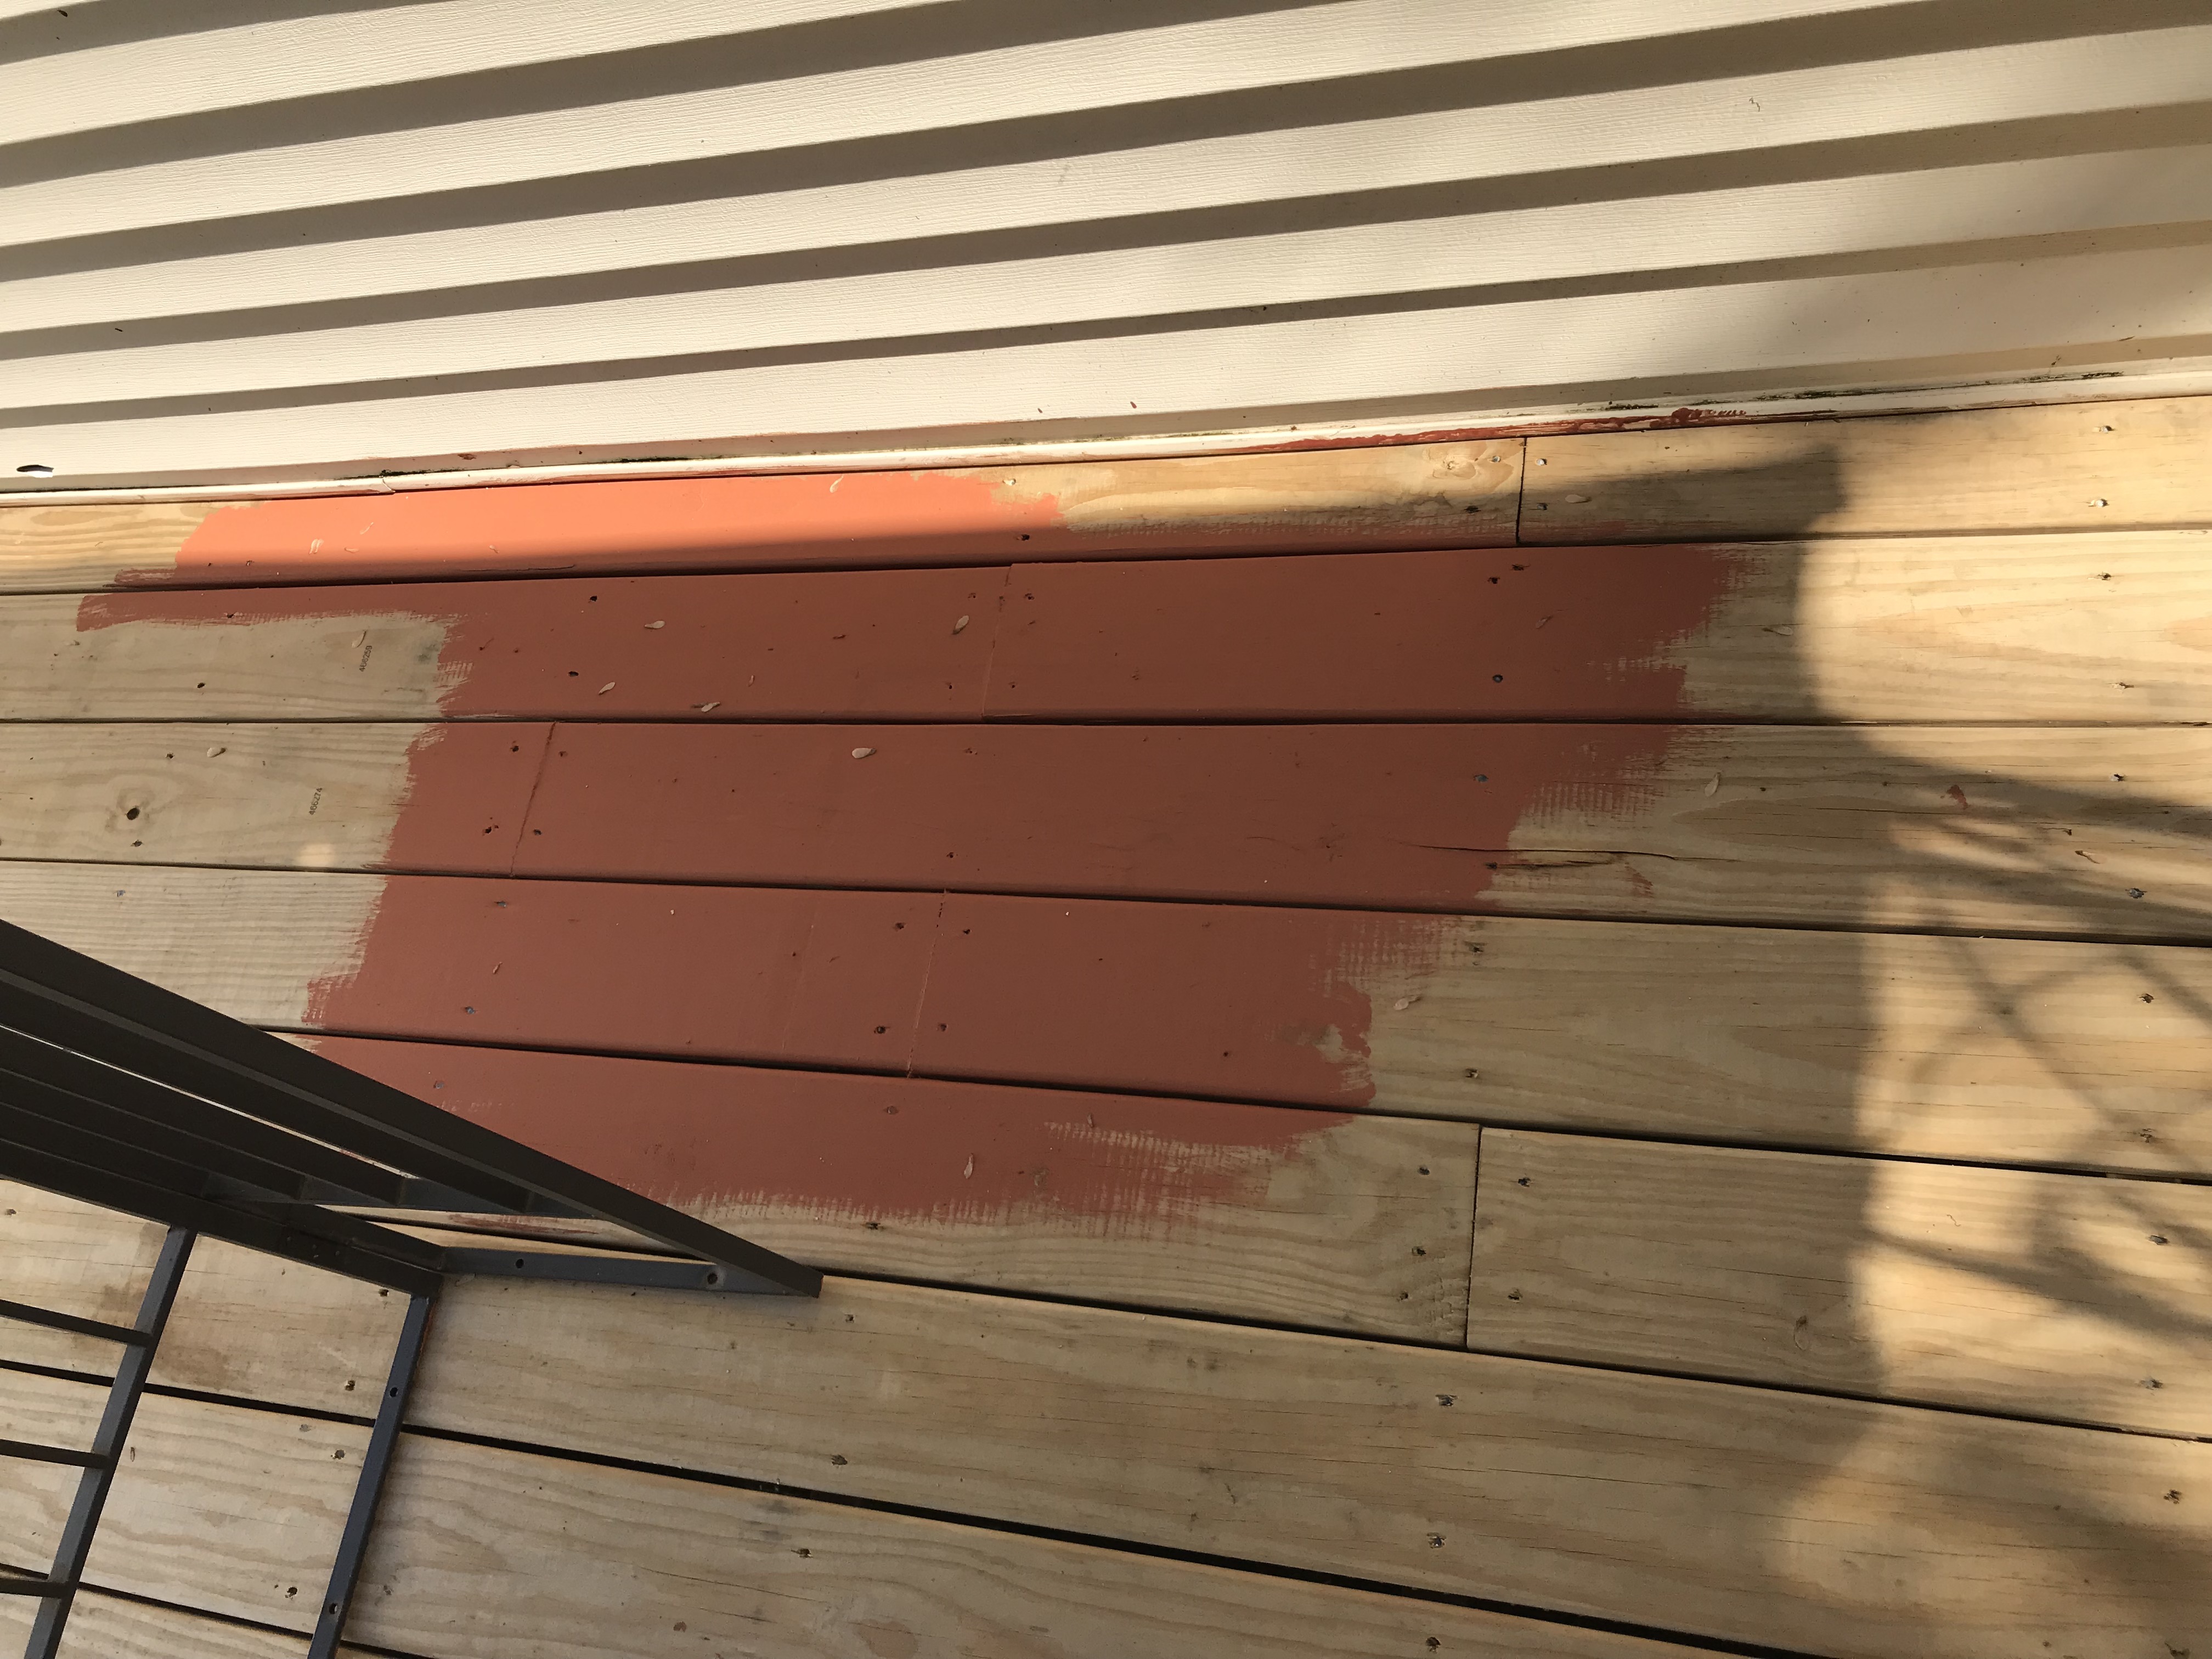 2nd portion of the deck that had paint on it.